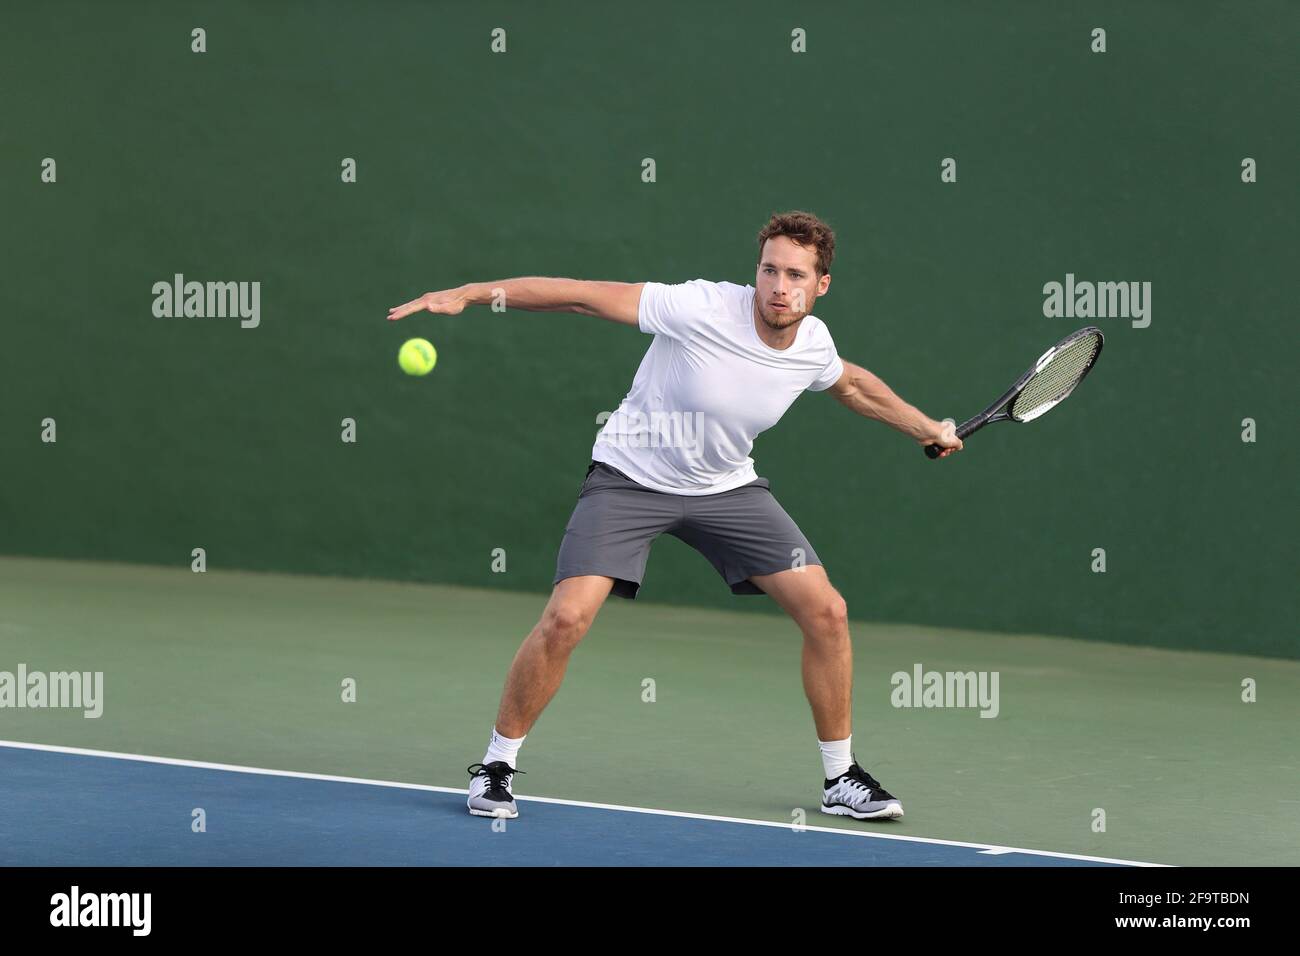 Professional tennis player athlete man hitting forehand ball on hard court playing tennis match. Sport game fitness lifestyle person living an active Stock Photo